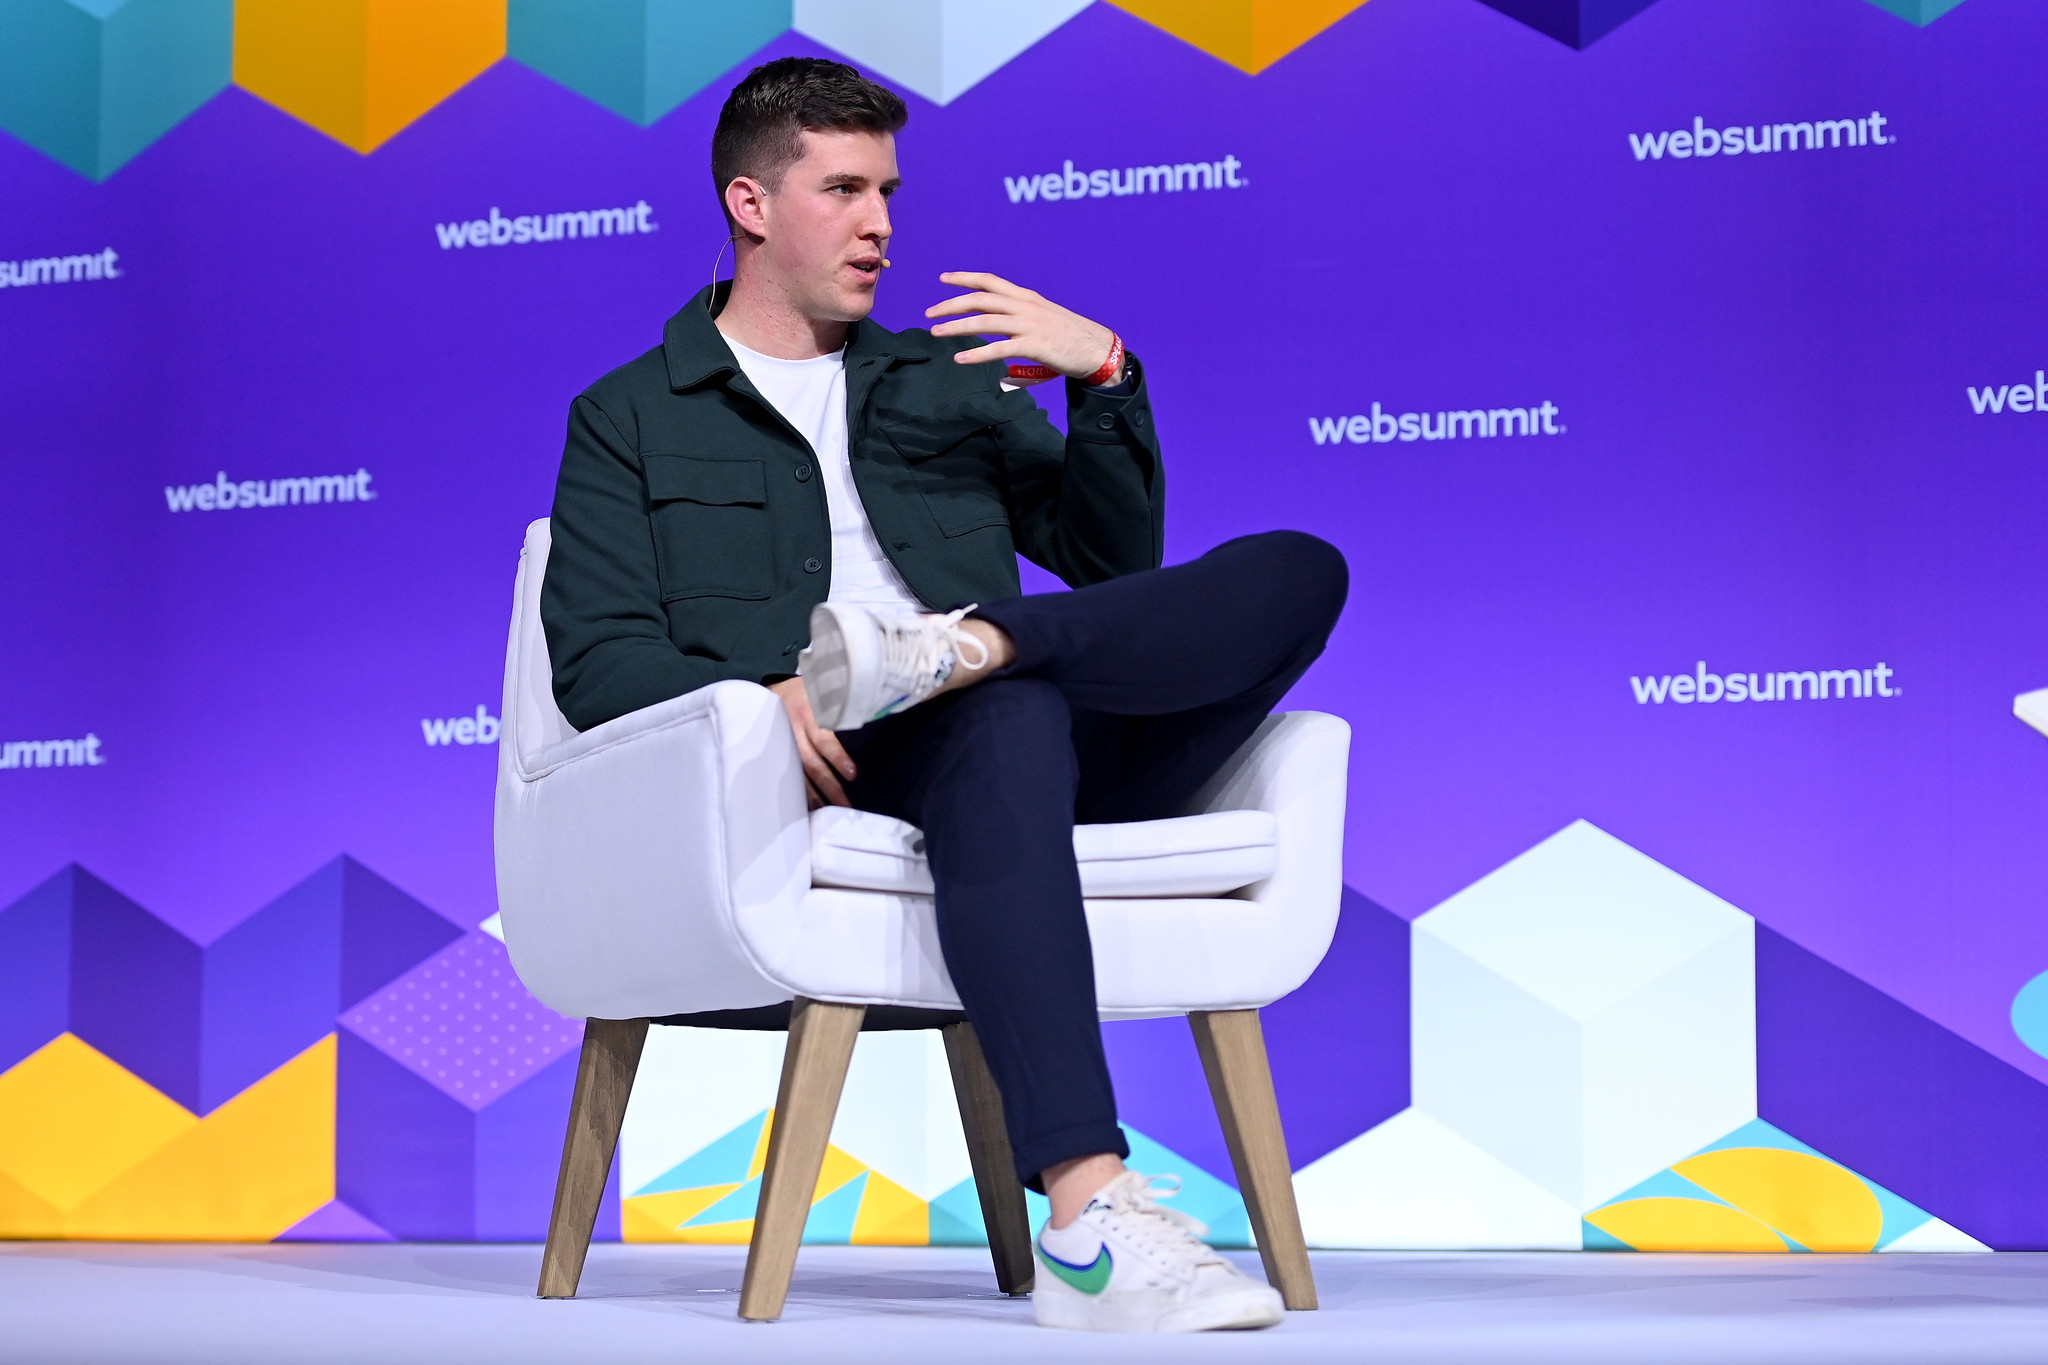 Photograph of a person (Ciarán O'Mara, co-founder and CTO of Protex AI) speaking on stage at Deep Tech at Web Summit. They are sitting on a chair with one leg crossed over their other knee. They are gesturing with their hand.